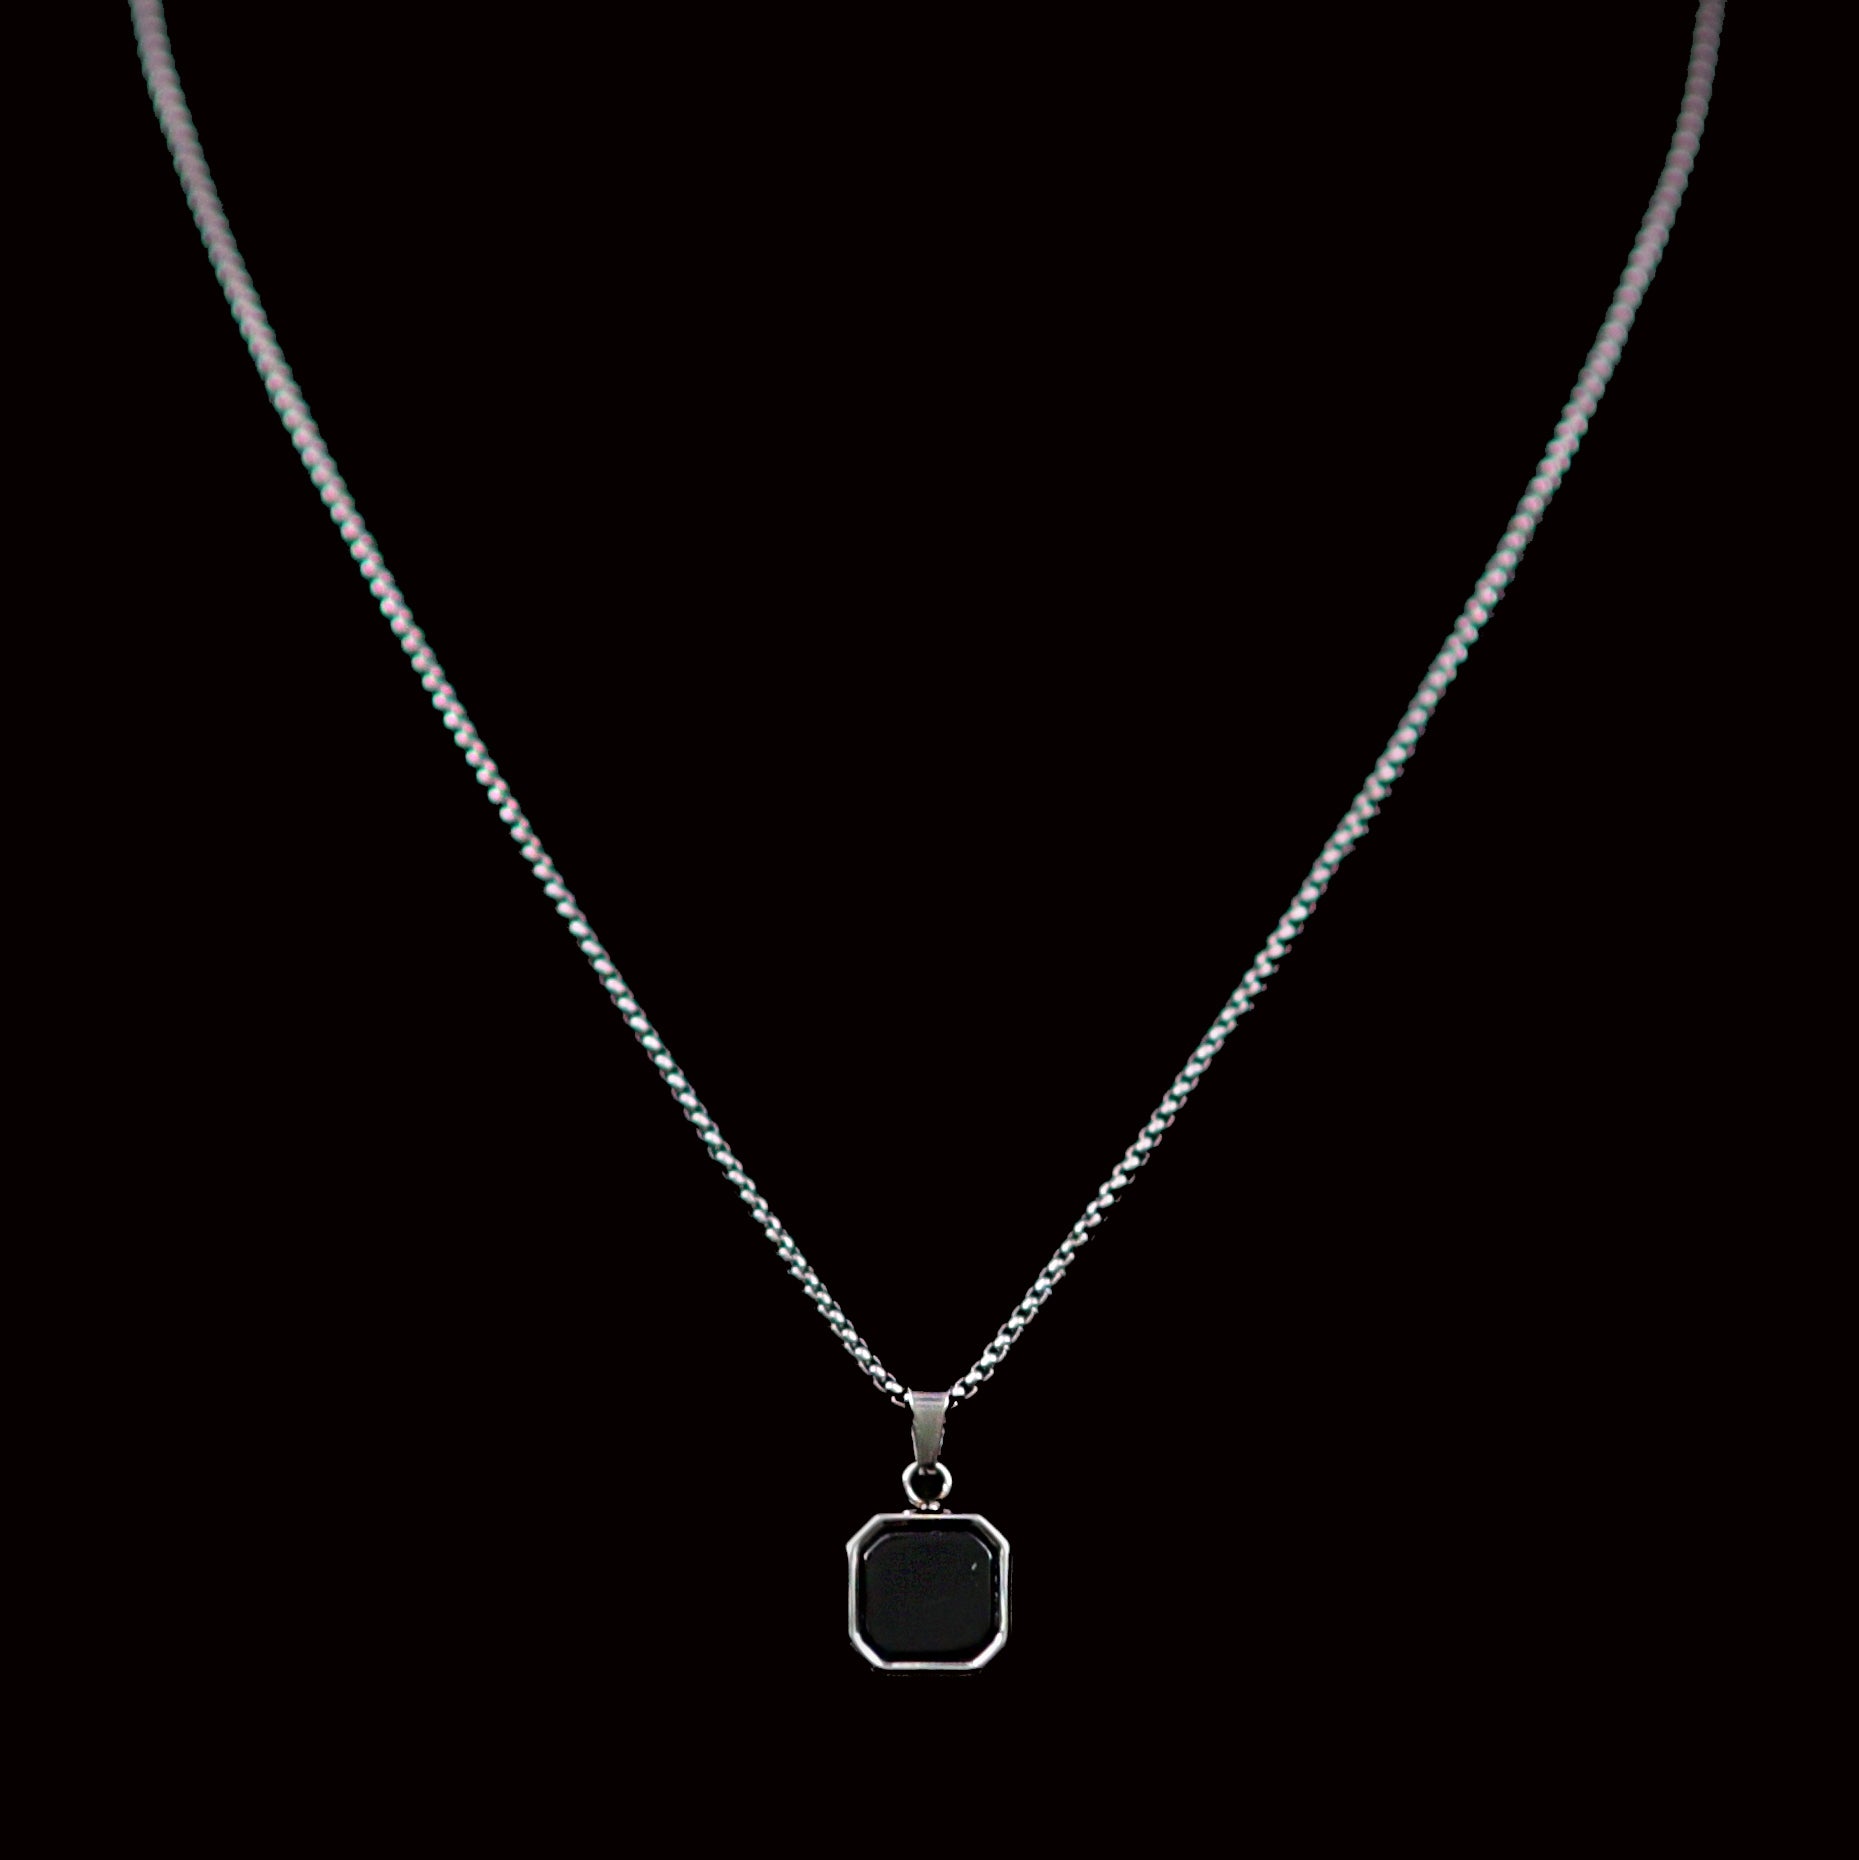 Kare Stainless Steel Box Chain Necklace with Square Stone Pendant